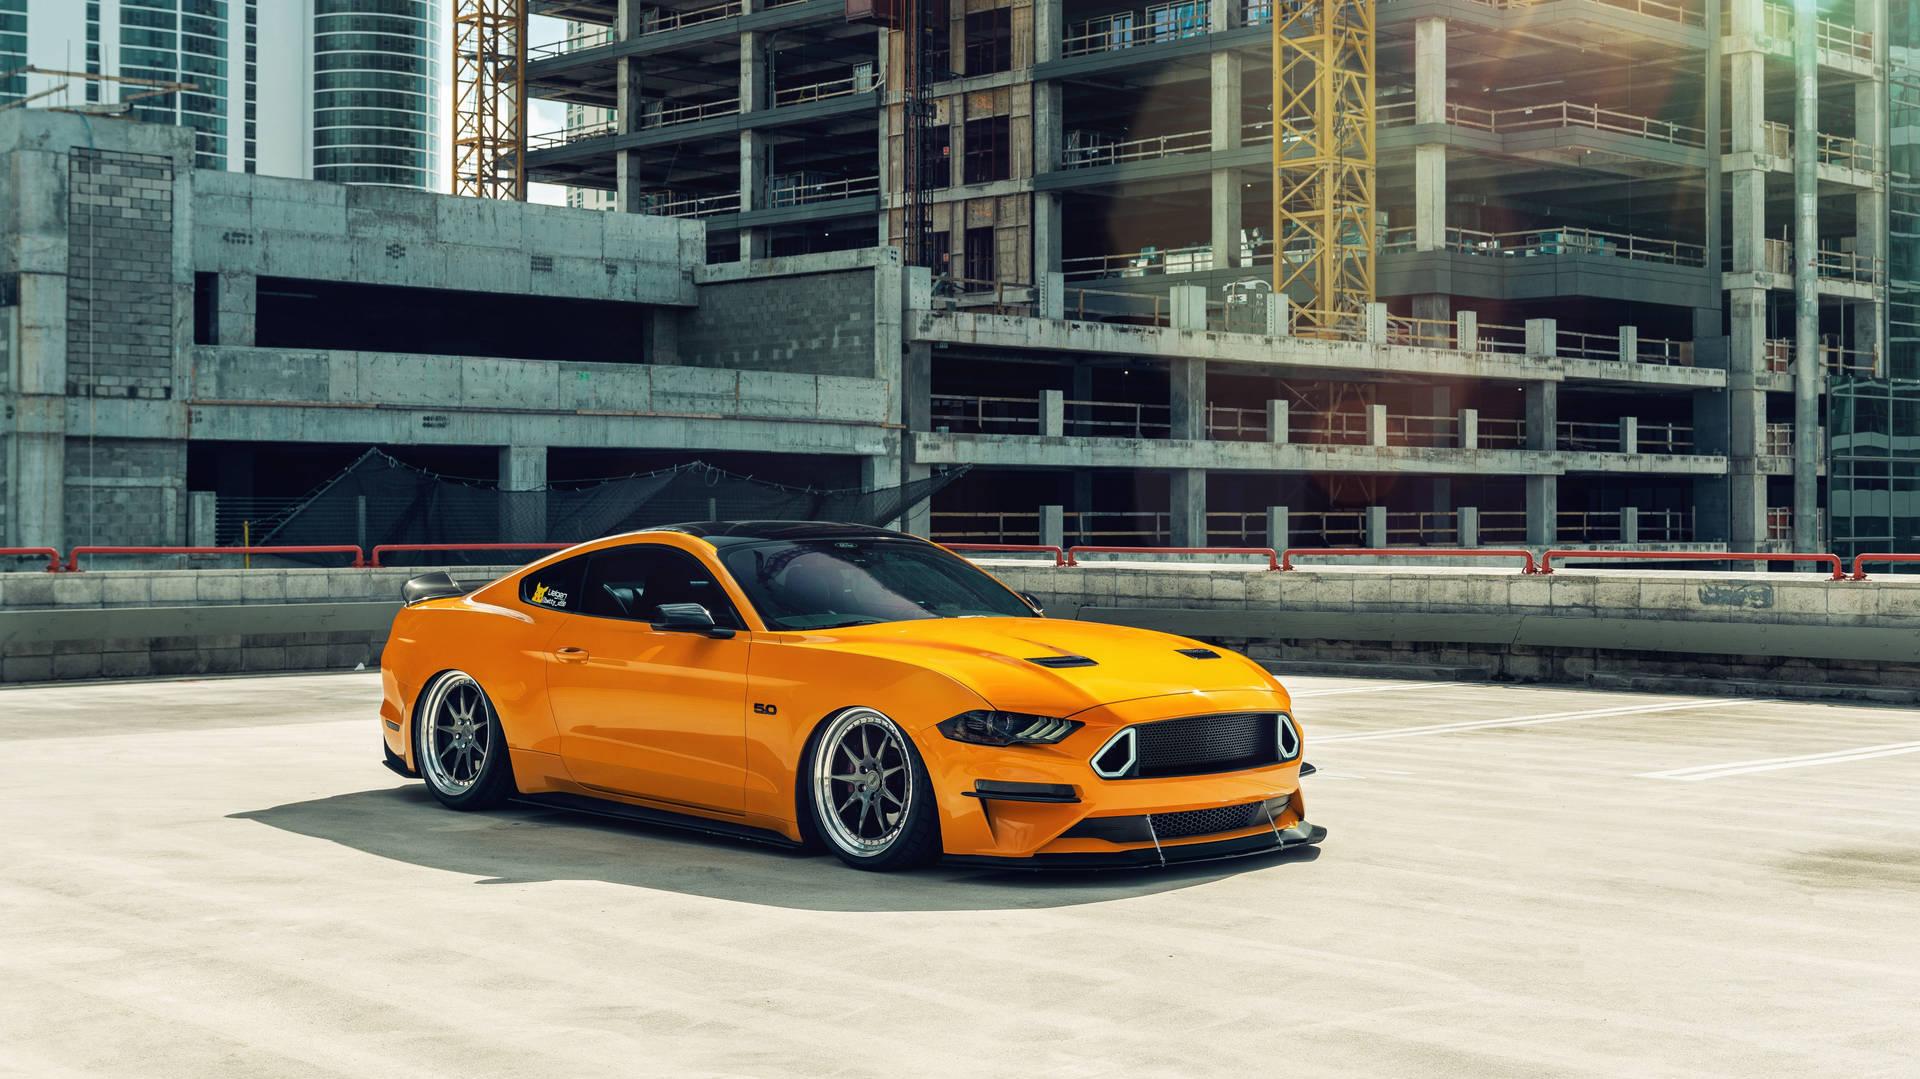 A Yellow Ford Mustang Parked In Front Of Building